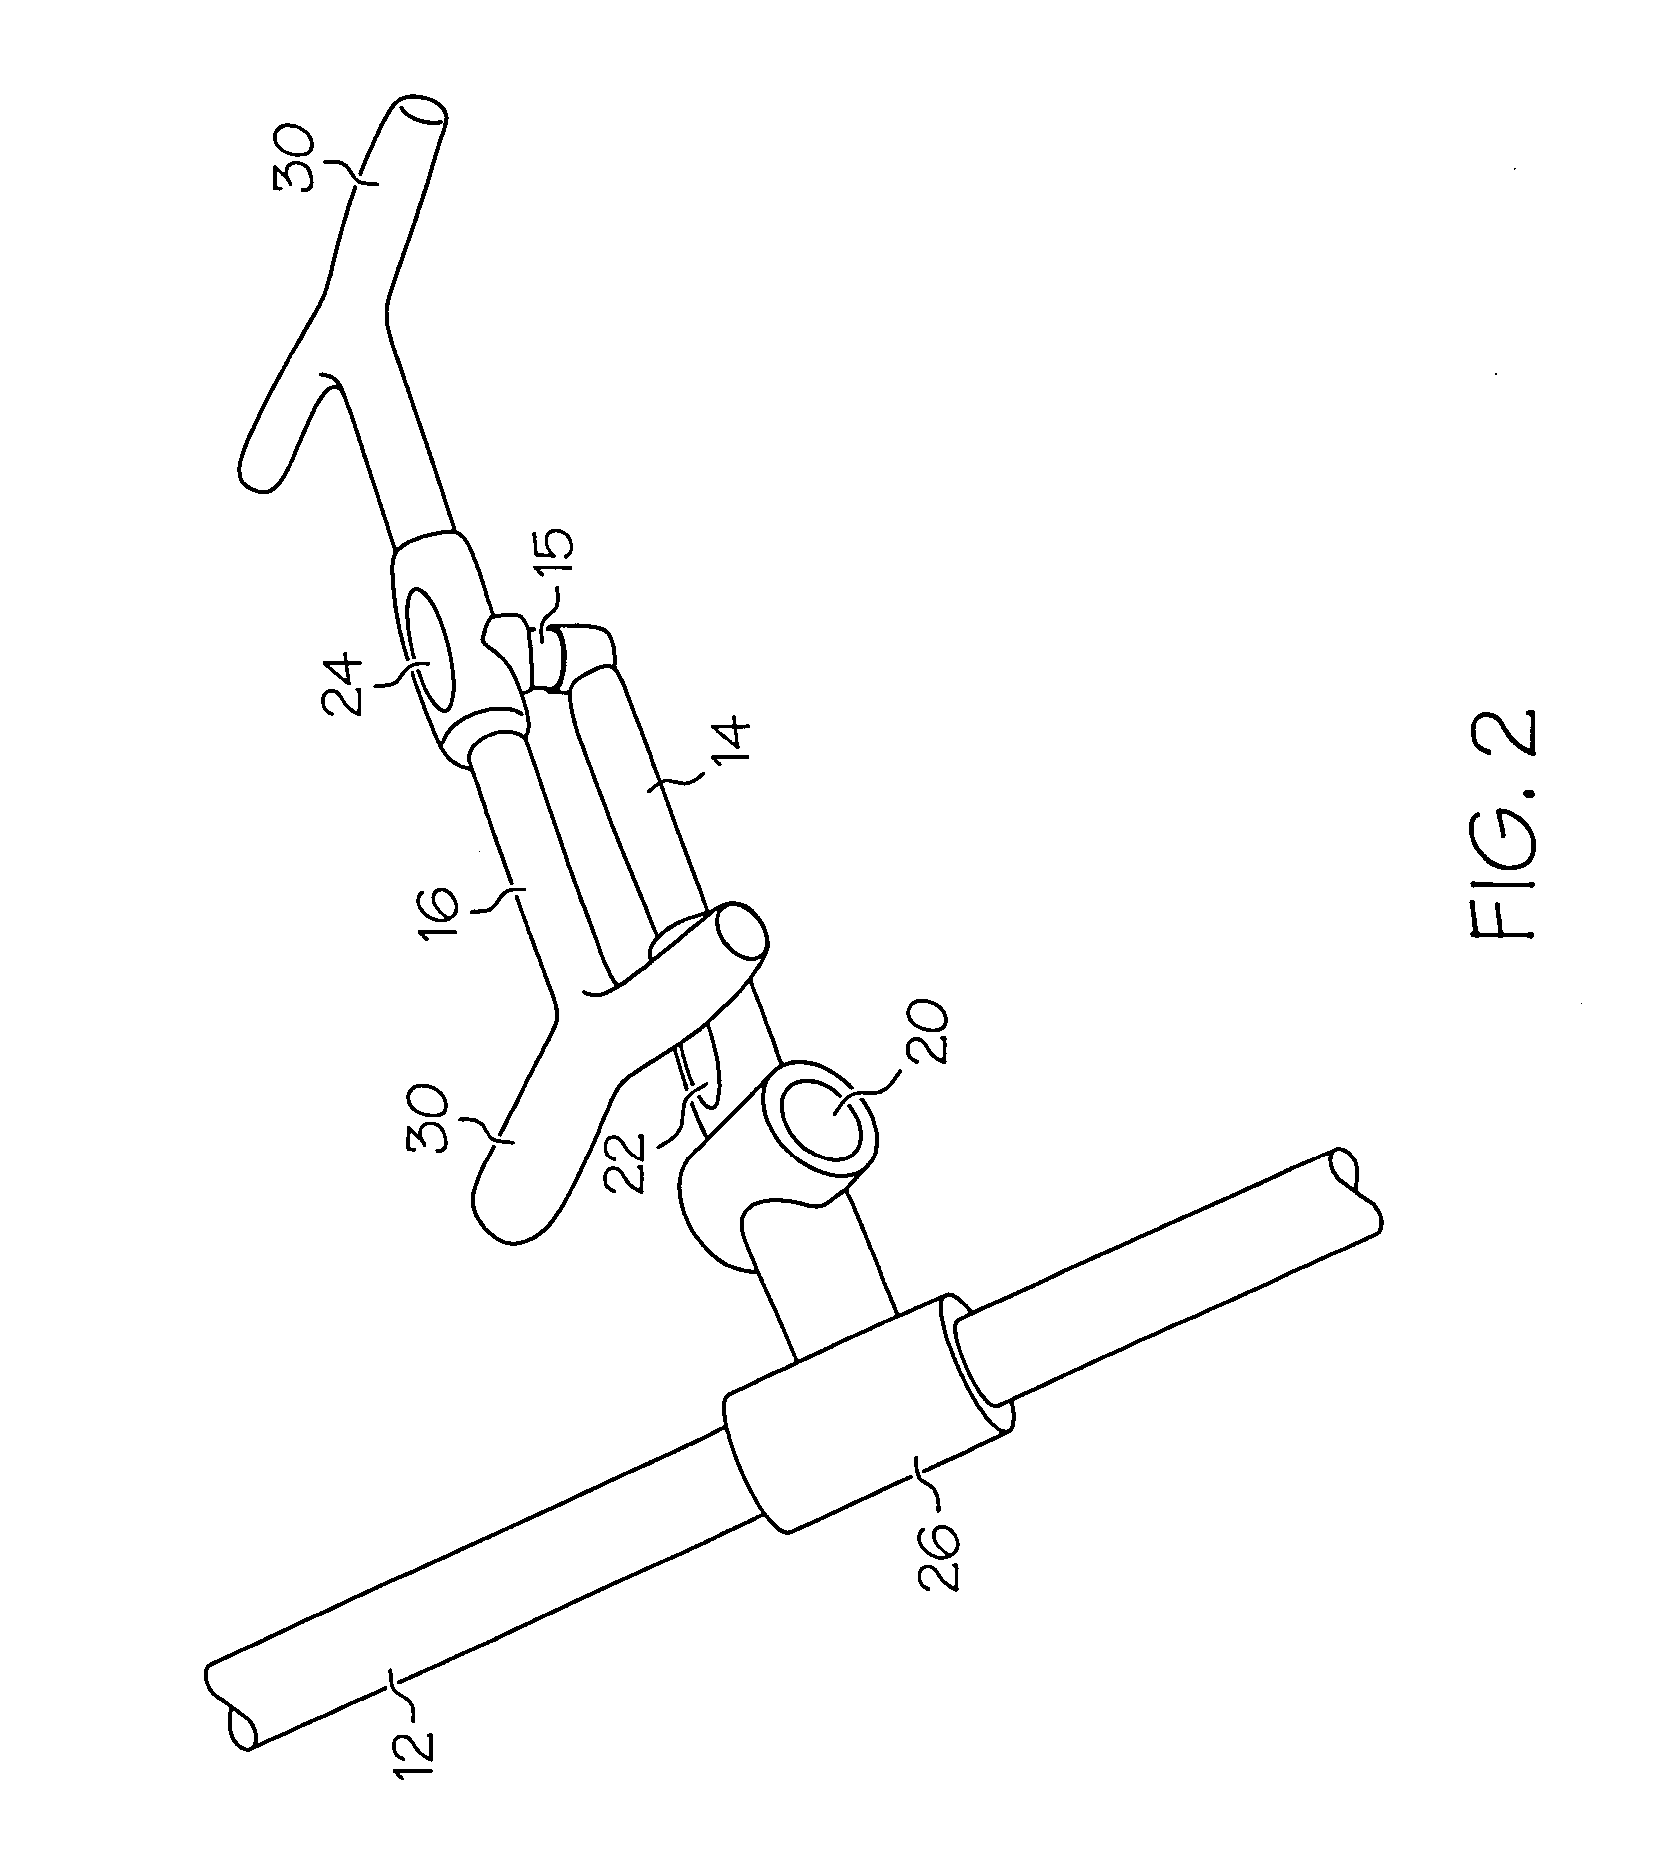 Assist apparatus and method